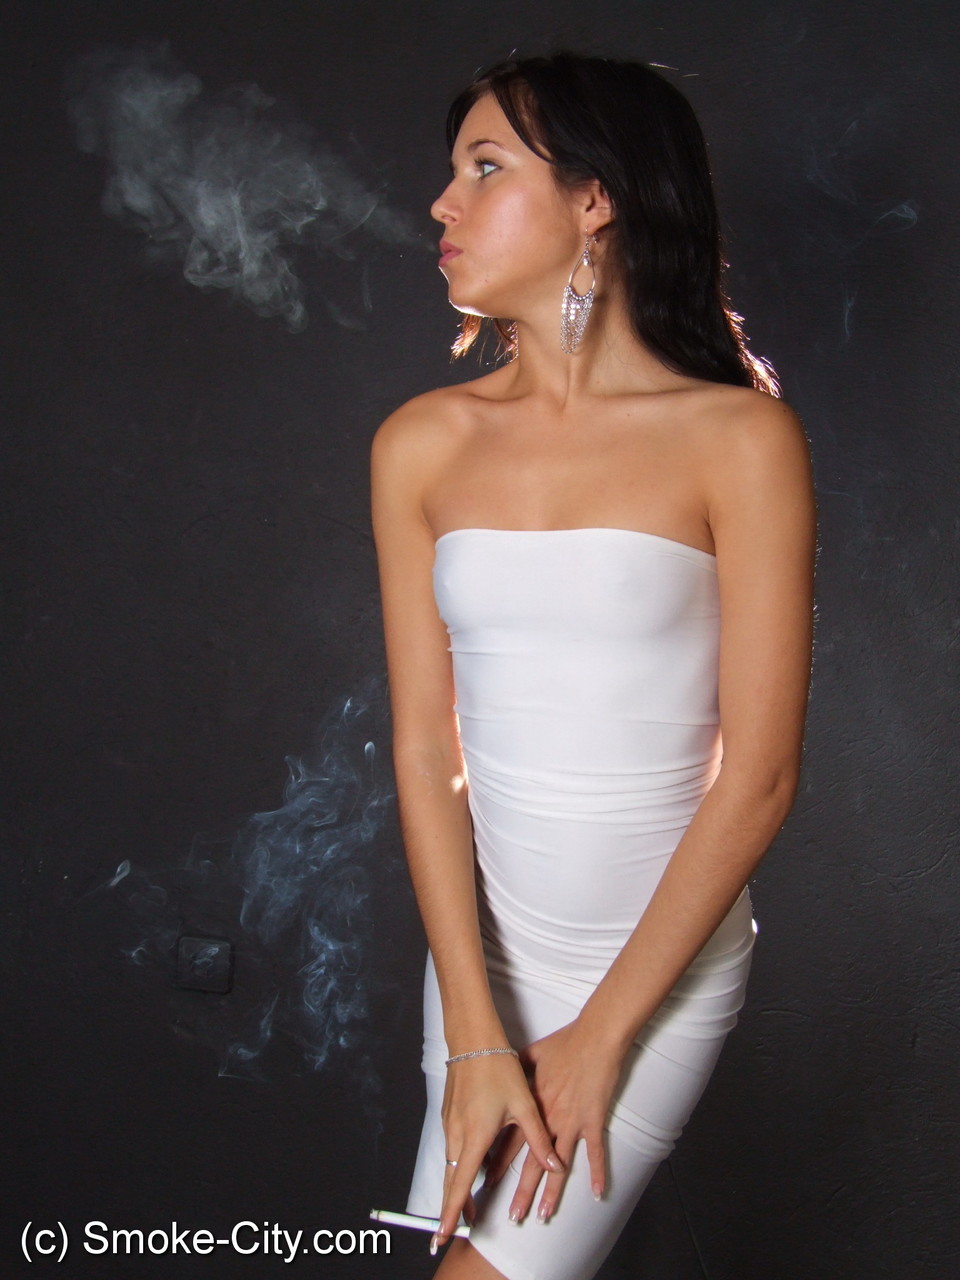 Young brunette smokes a cigarette while wrapped in tight white dress and heels foto porno #426521983